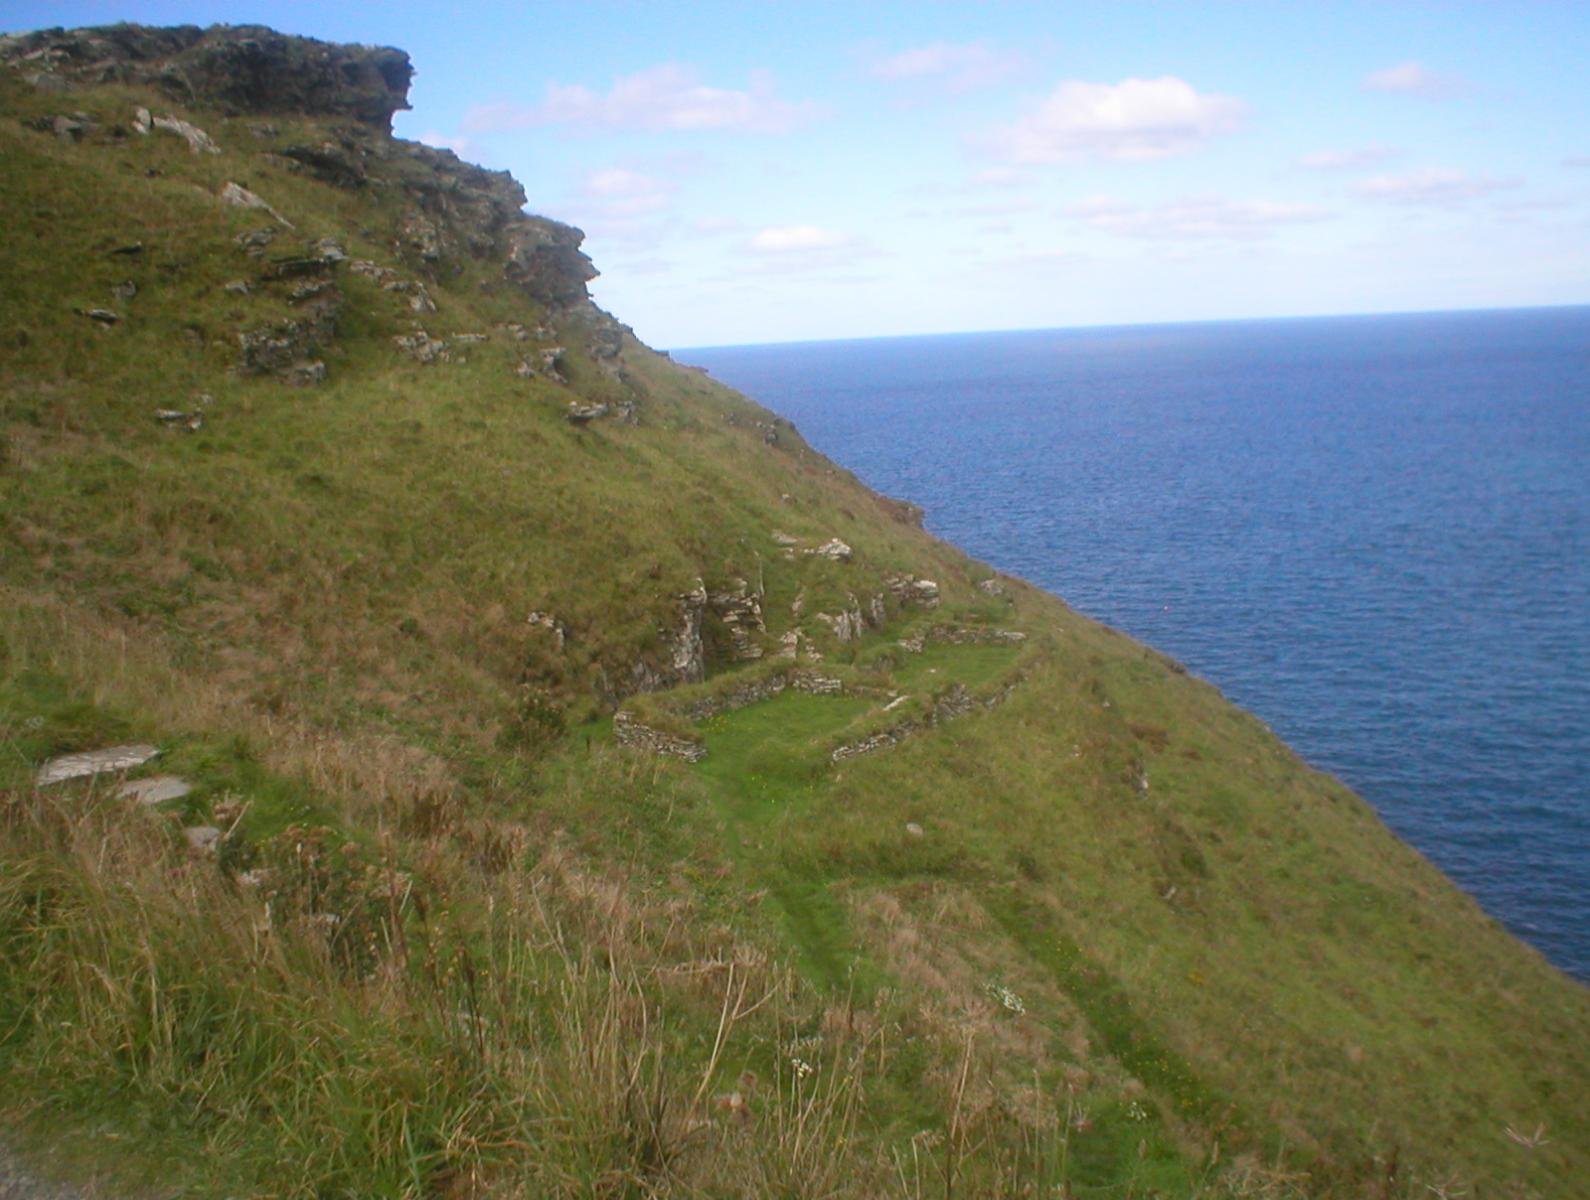 Tintagel, King Arthur's castle and birthplace